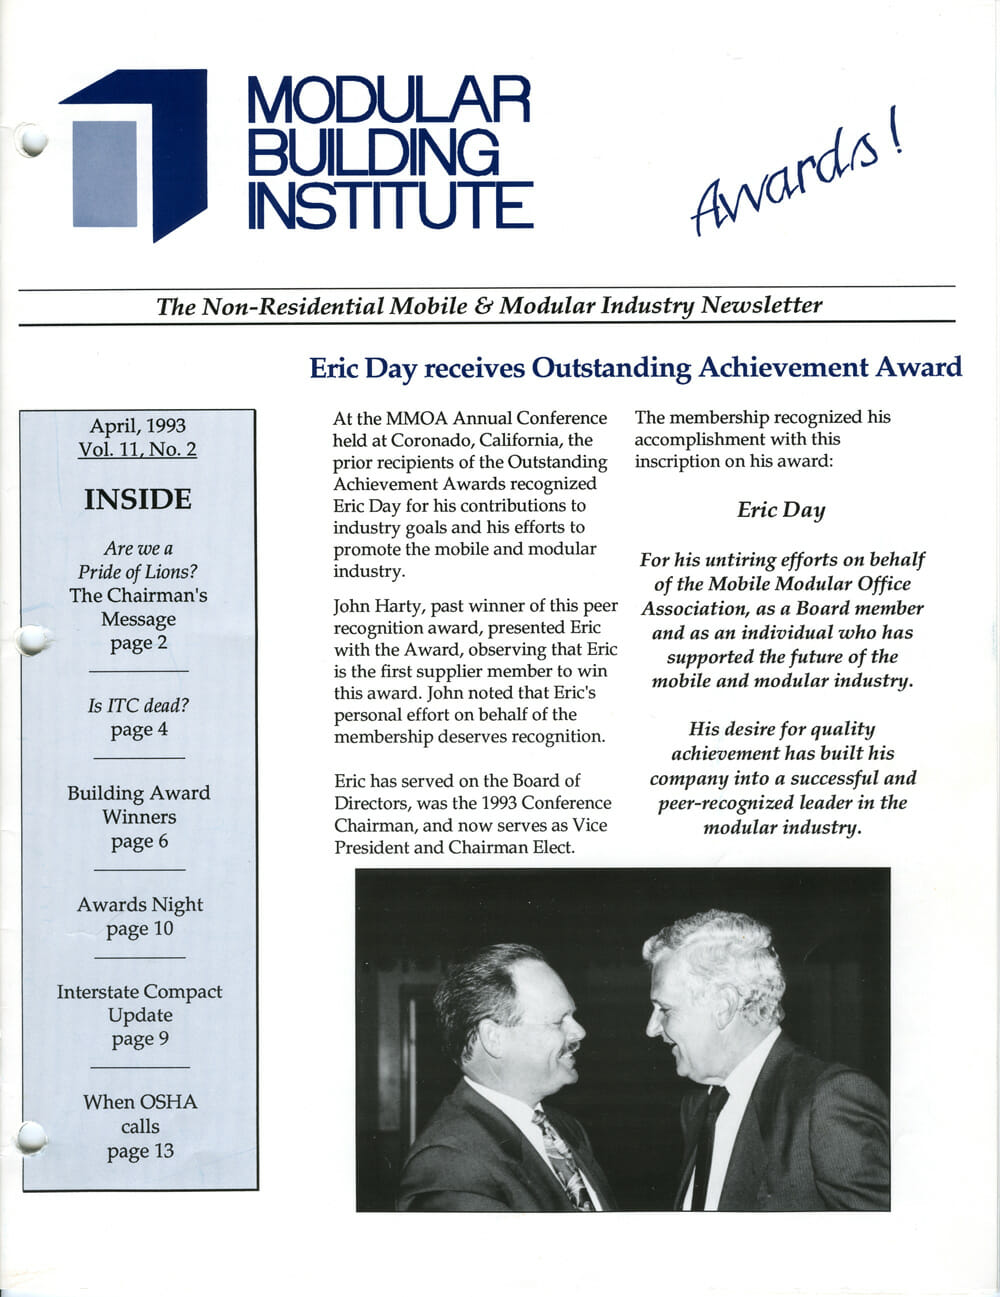 The Modular Building Institute's newsletter from 1993